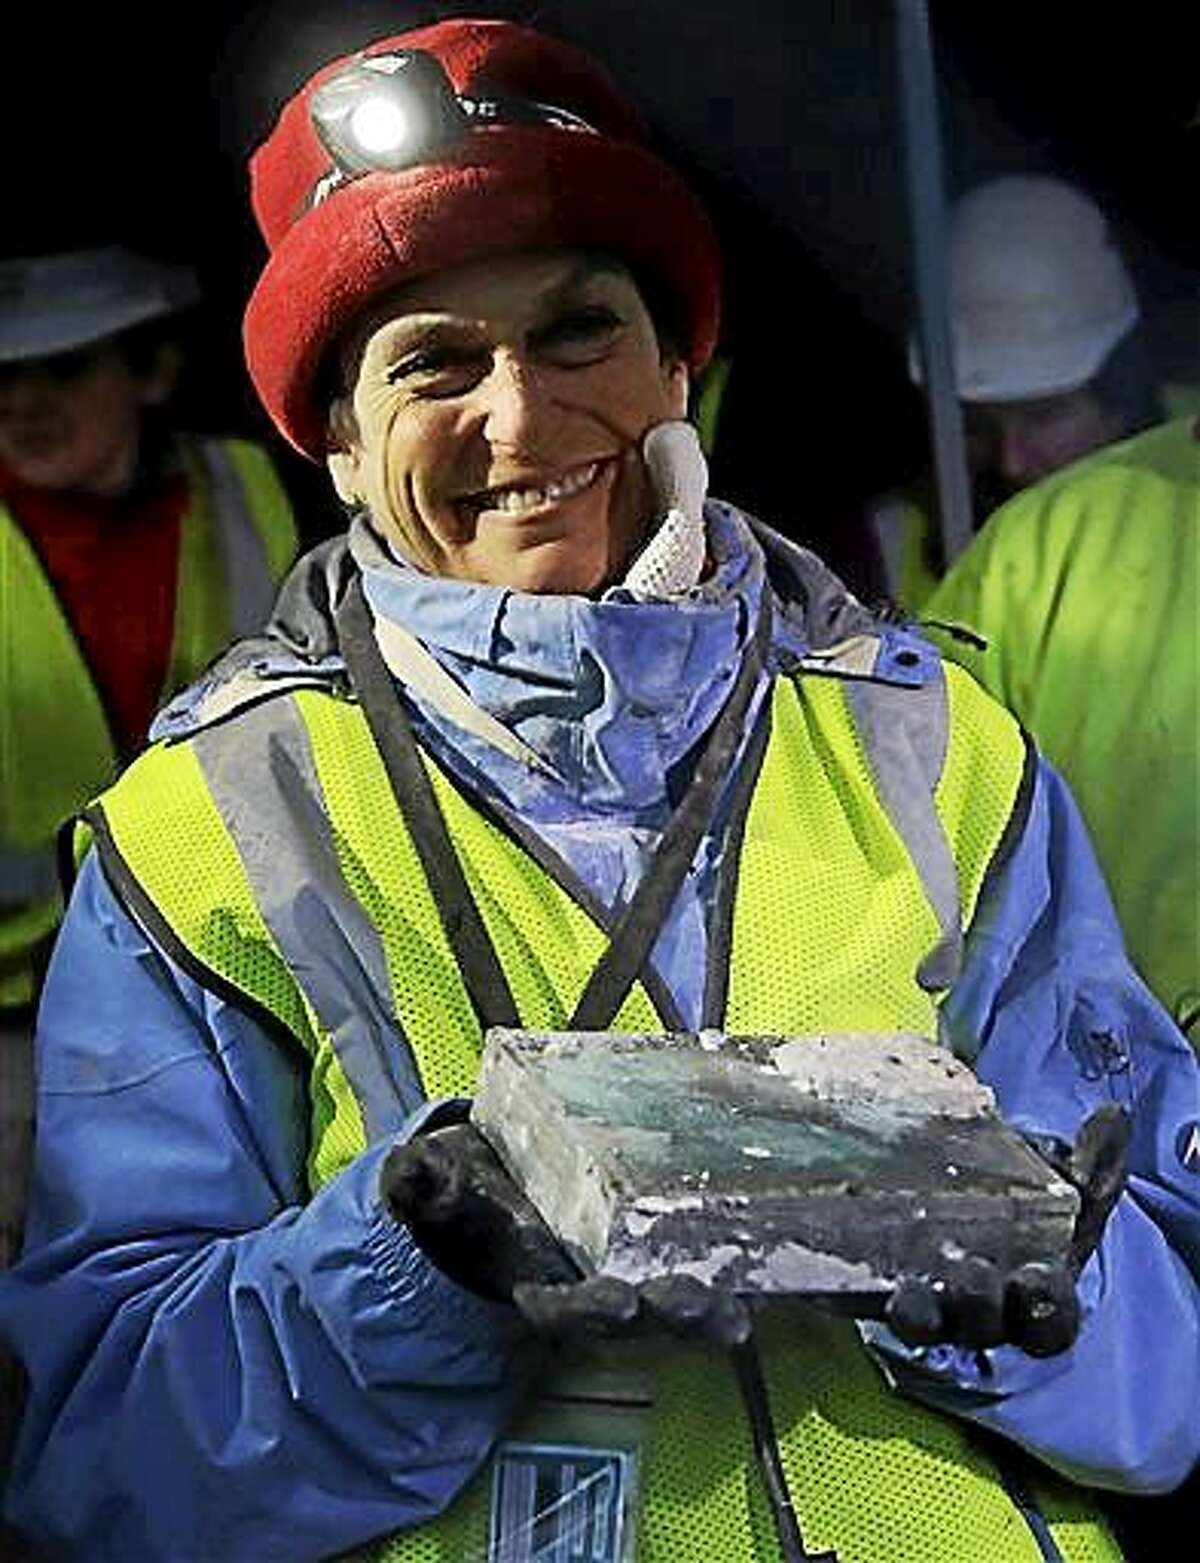 Pamela Hatchfield, a conservator at the Boston’s Museum of Fine Arts, holds a time capsule she removed Dec. 11 from the cornerstone of the Statehouse in Boston.